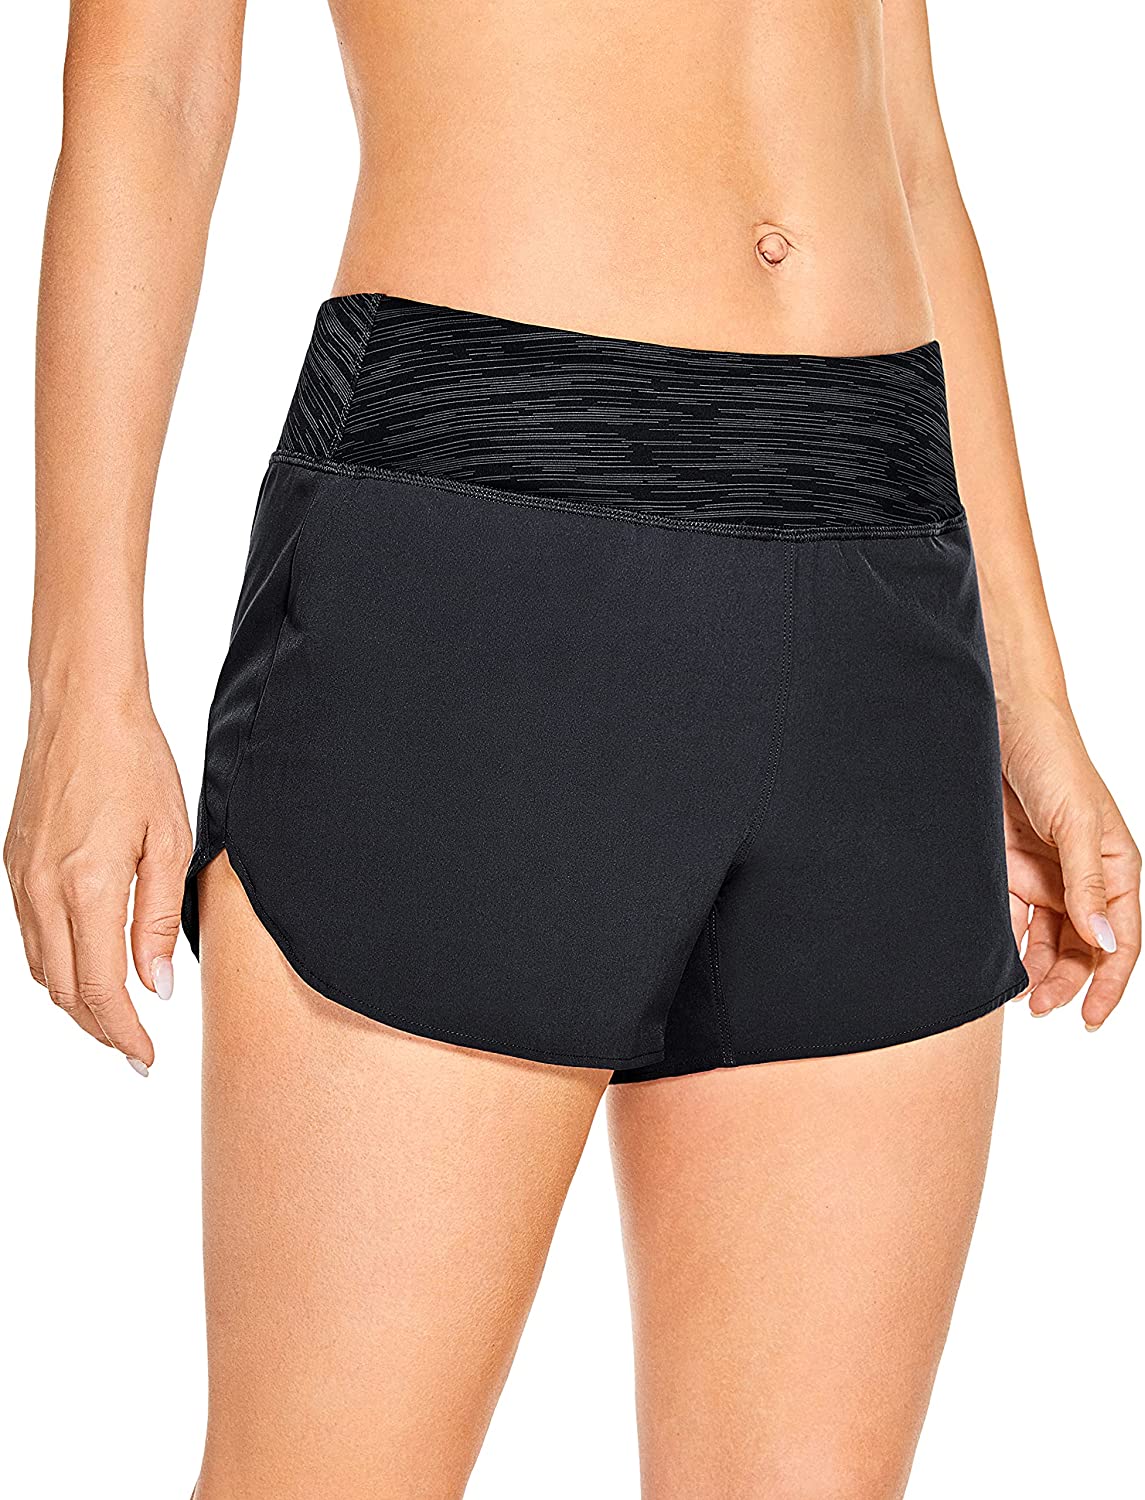  CRZ YOGA Womens Quick Dry Workout Running Shorts